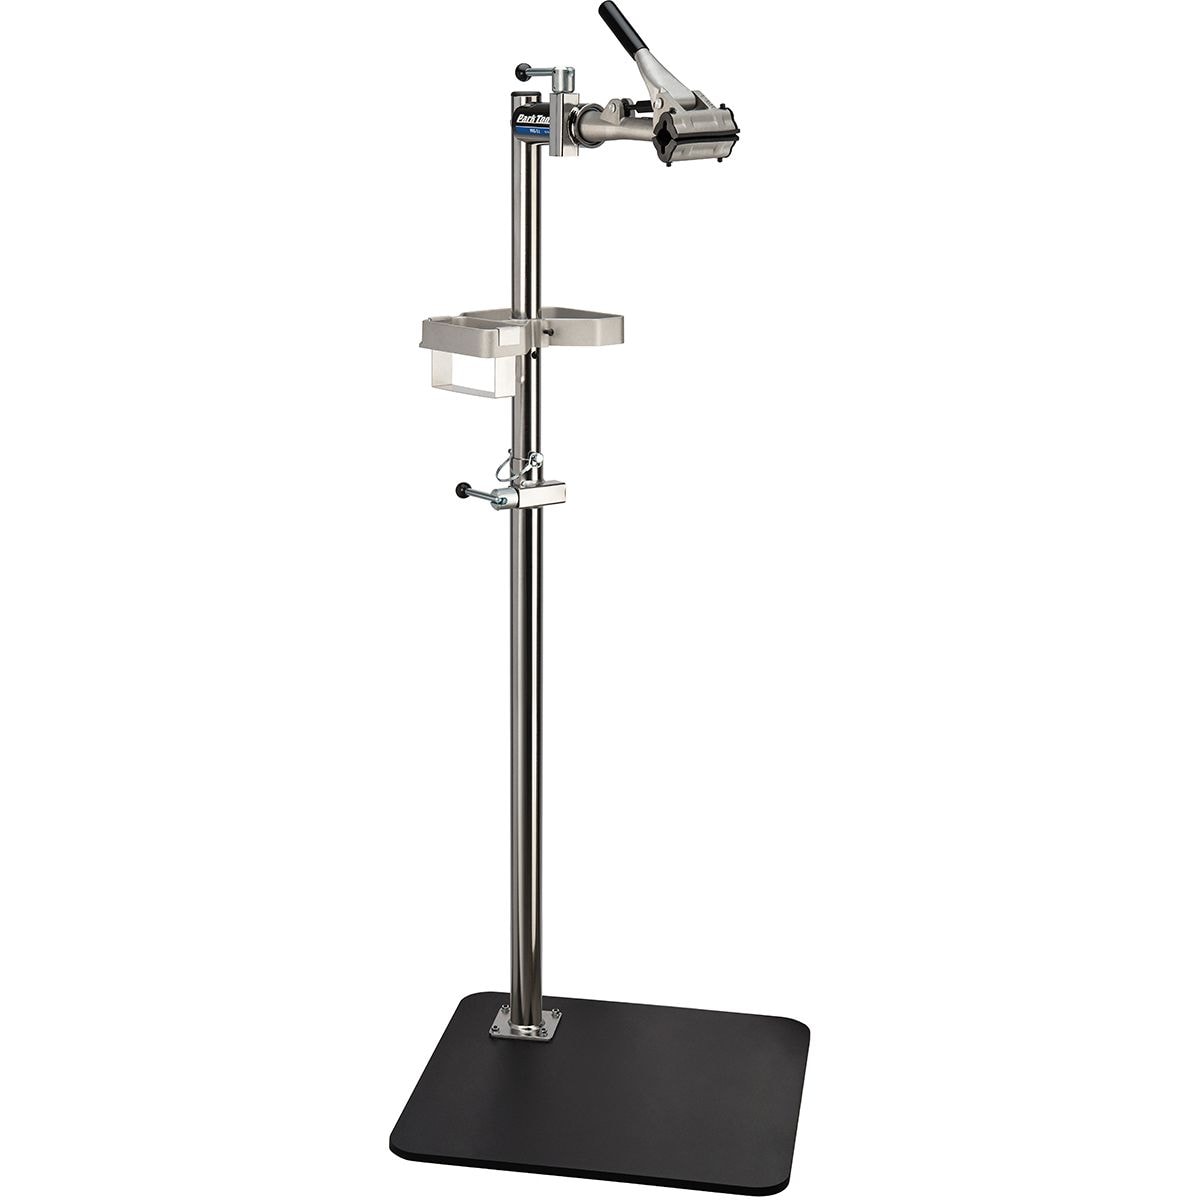 Park Tool PRS 3.2-1 Deluxe Single Arm Repair Stand with 100-3C Clamp